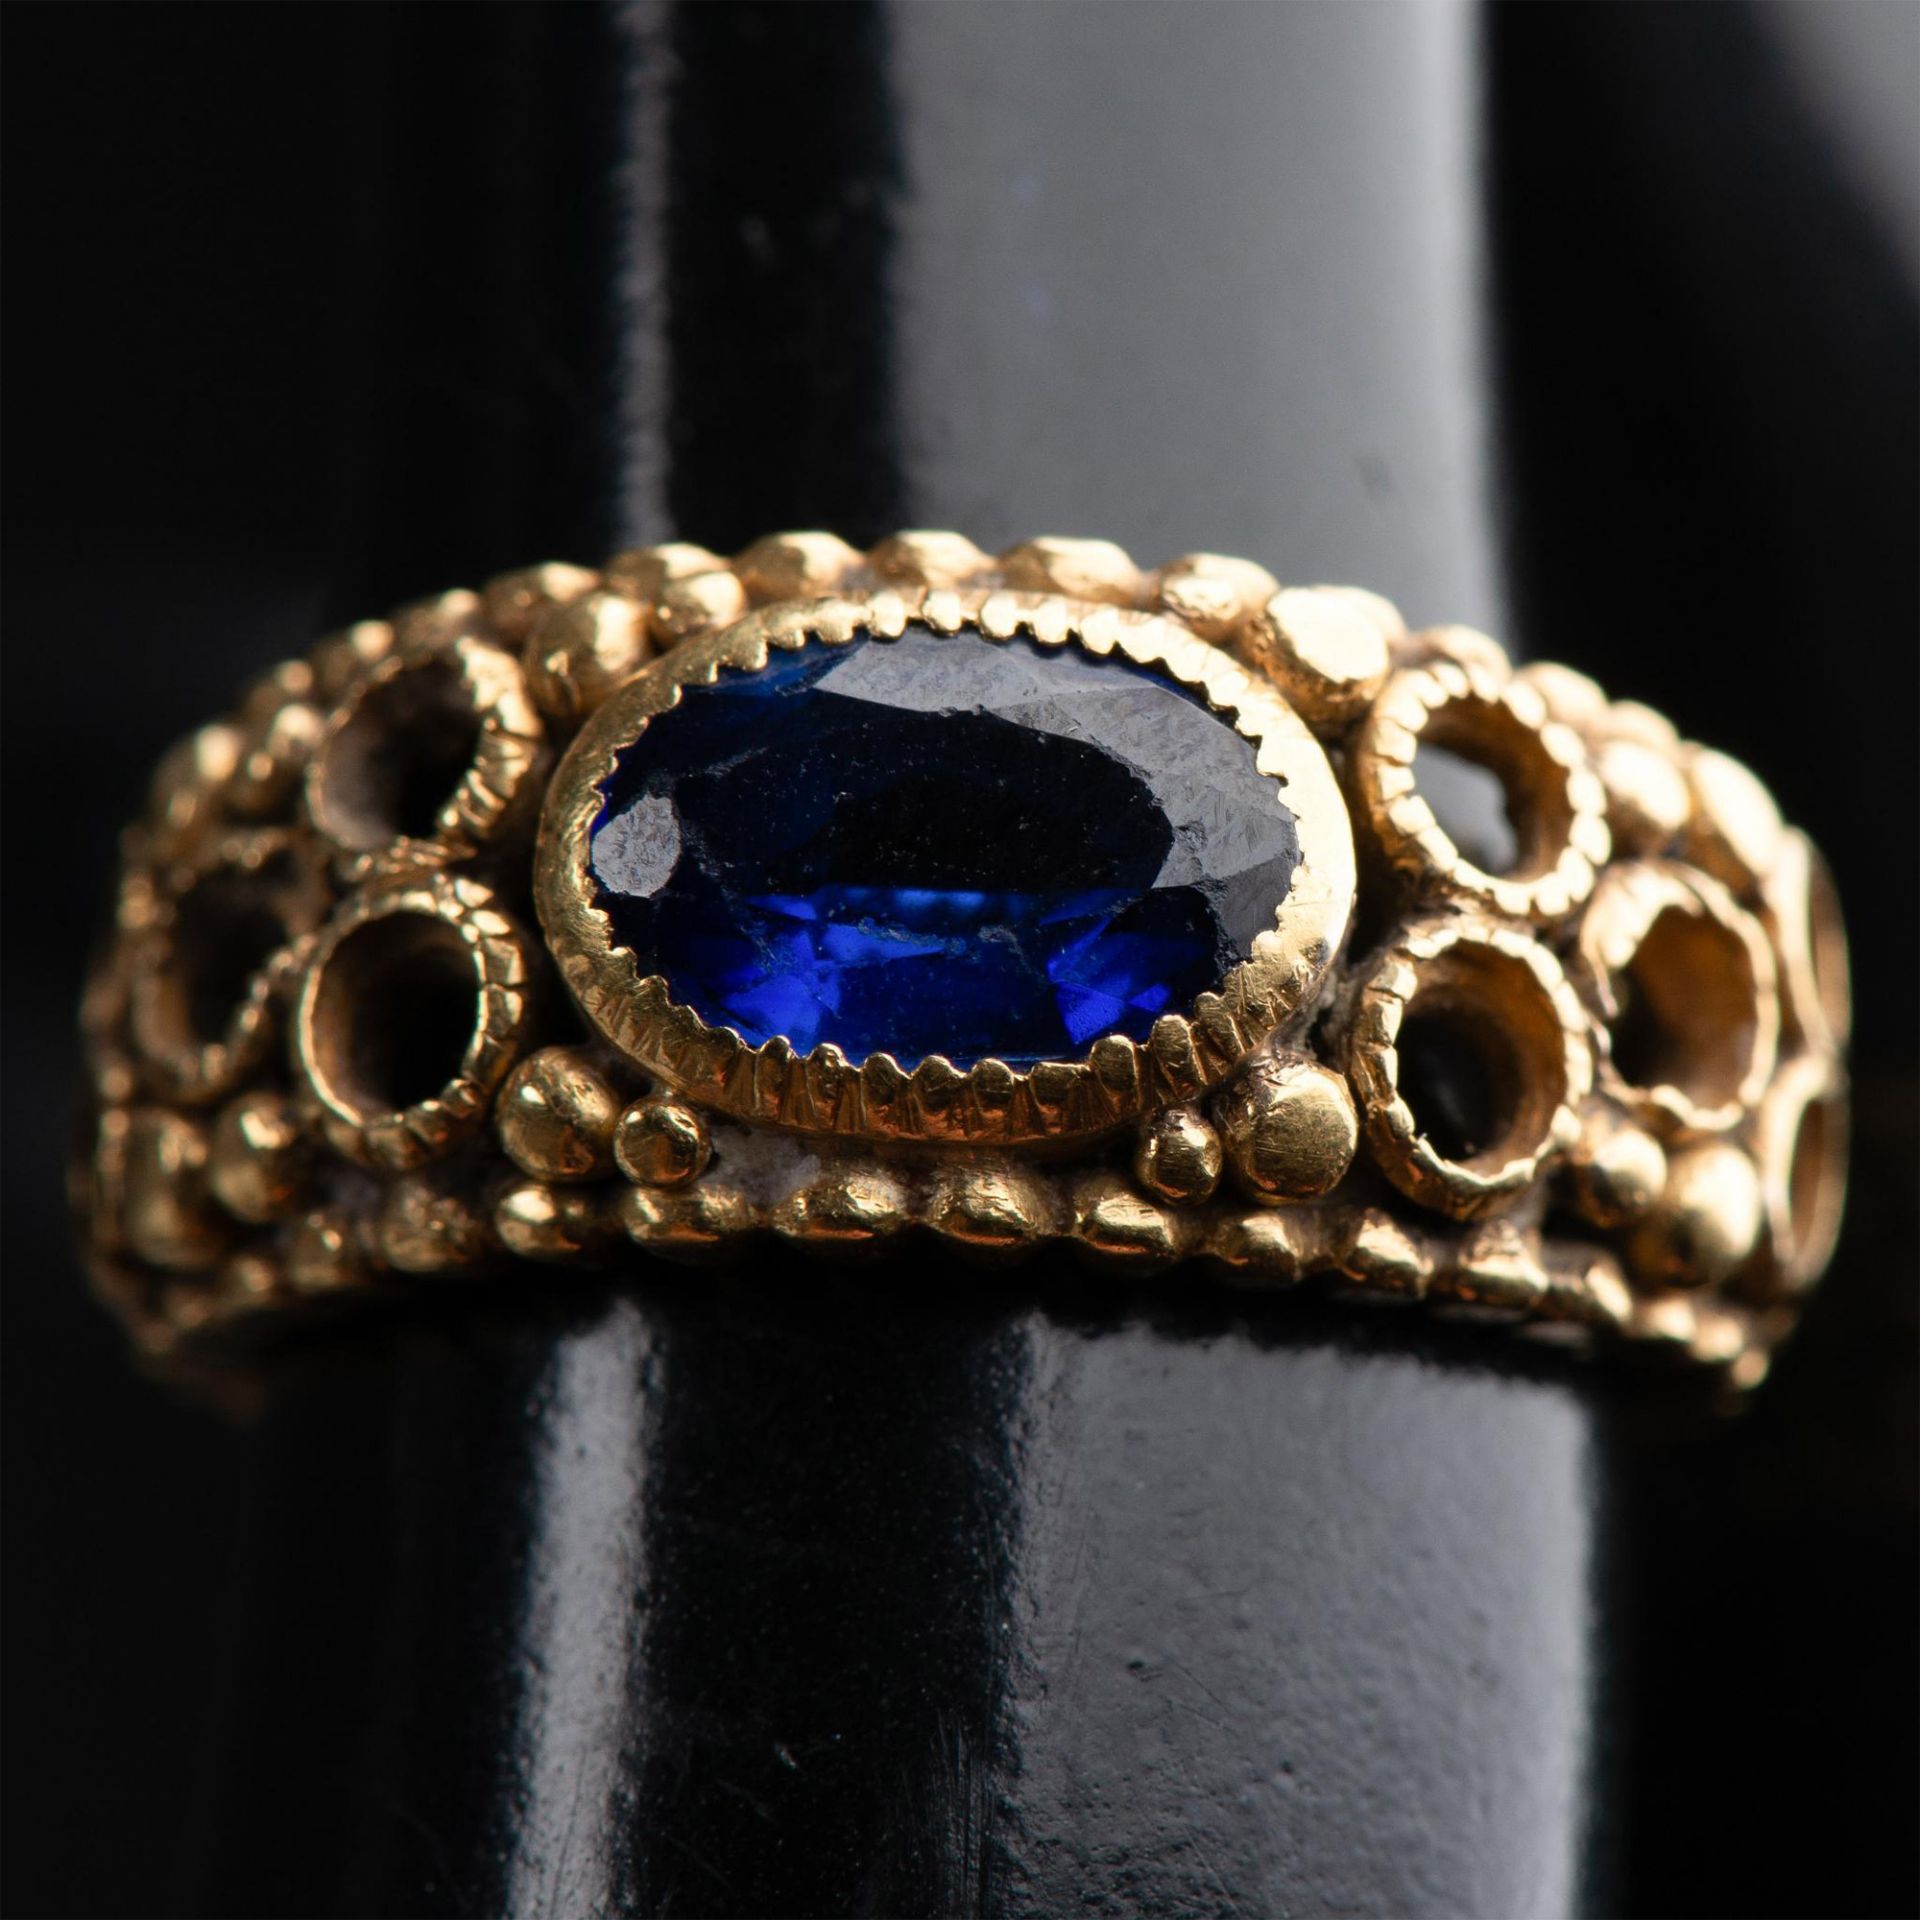 Antique 19th c. 20K Gold and Natural Sapphire Ring - Image 5 of 5